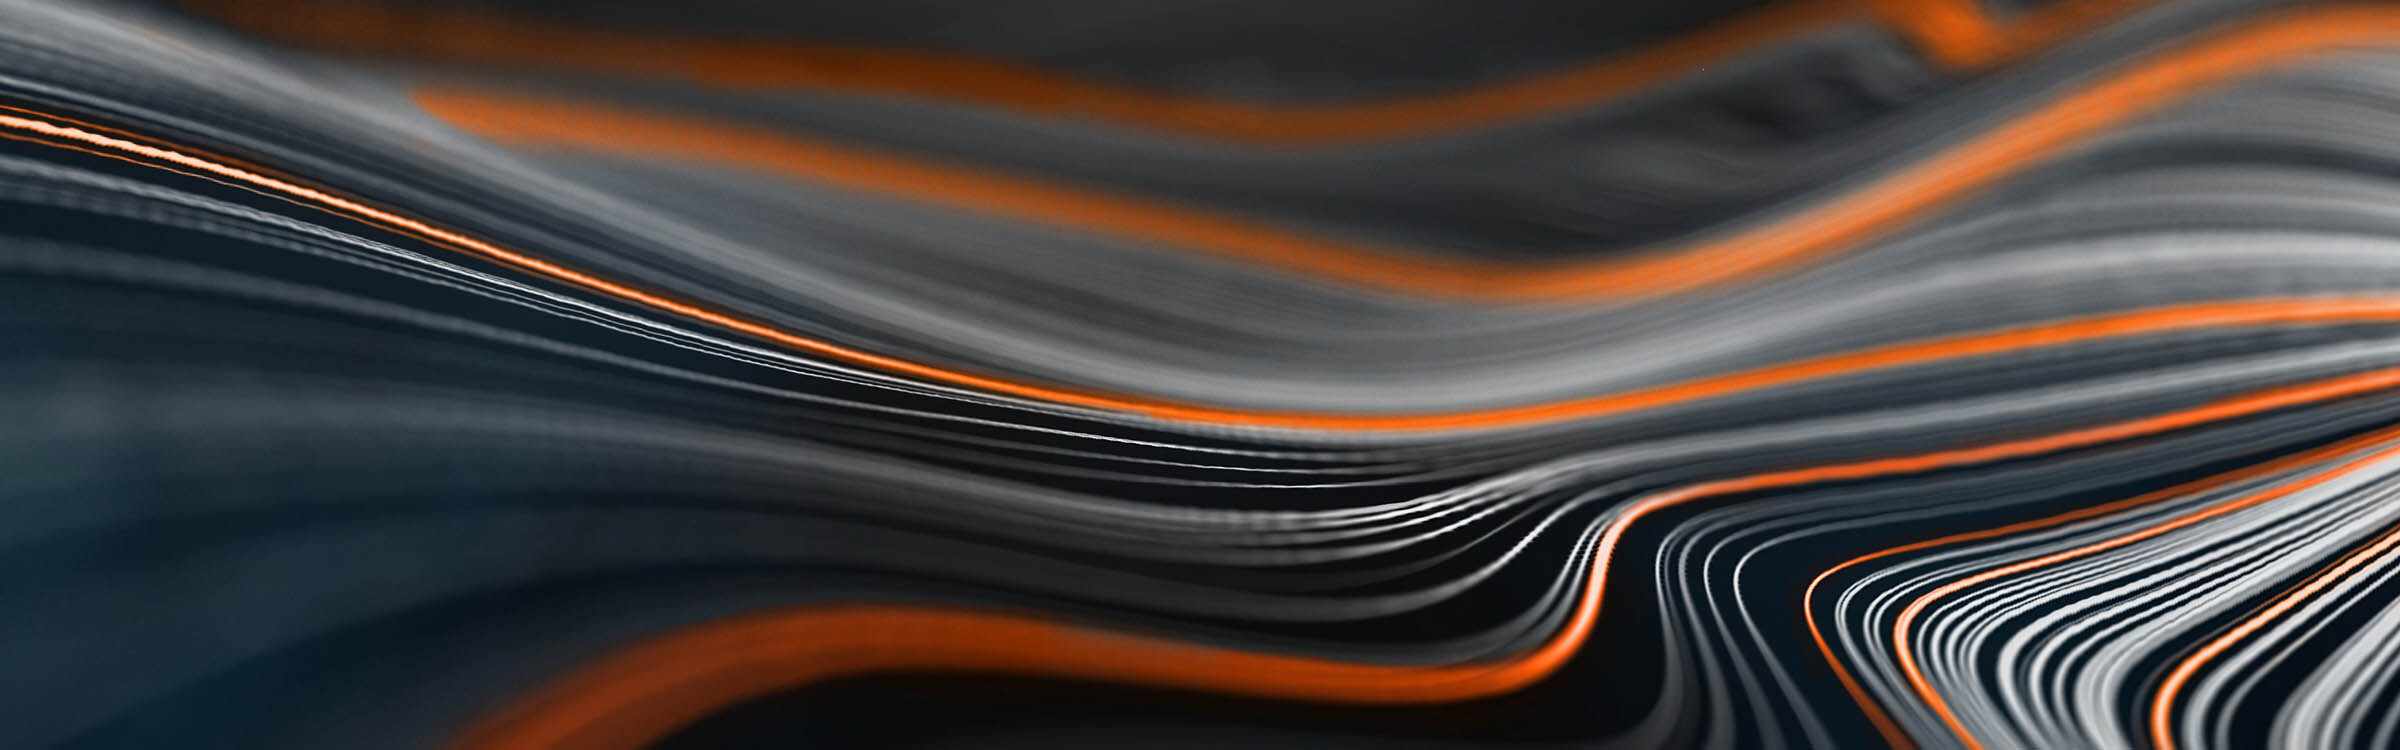 Abstract: Black and Orange Pattern